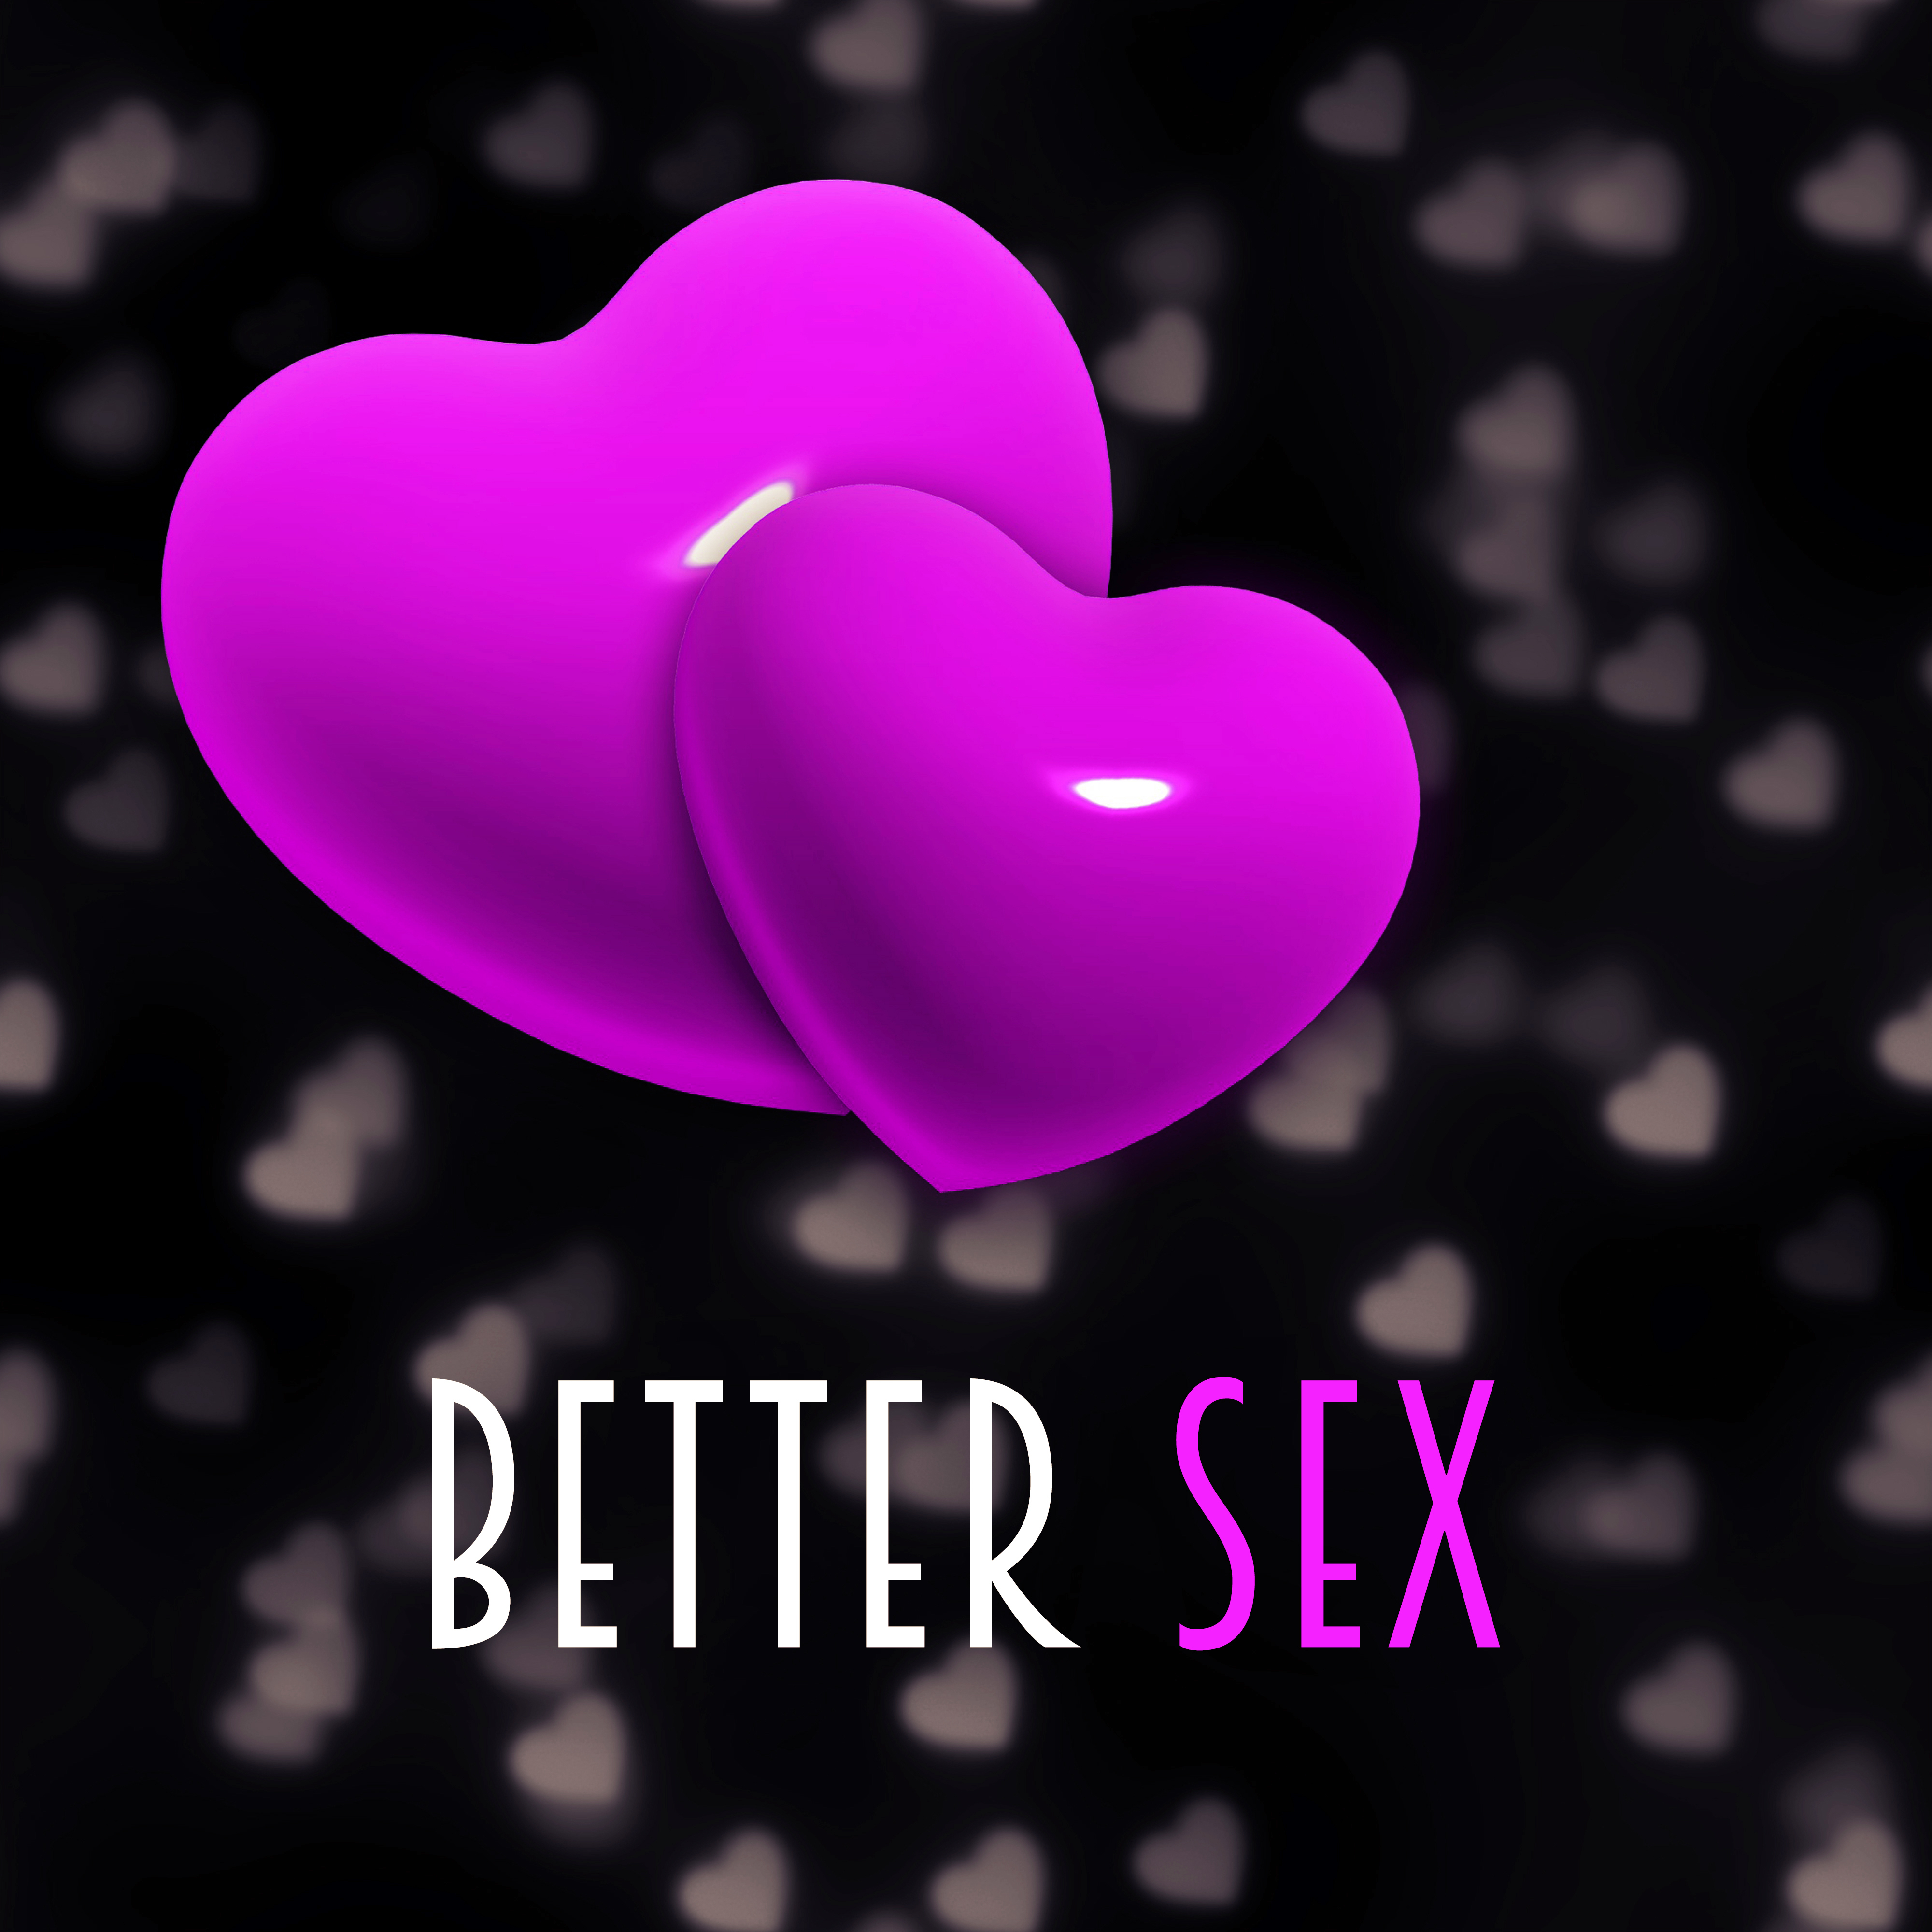 Better *** - Cool Love, Make Love, Love Night, Meeting Singles, Feeling Stronger, Soft and Pleasant, Kiss and Touch, Delight and Scream